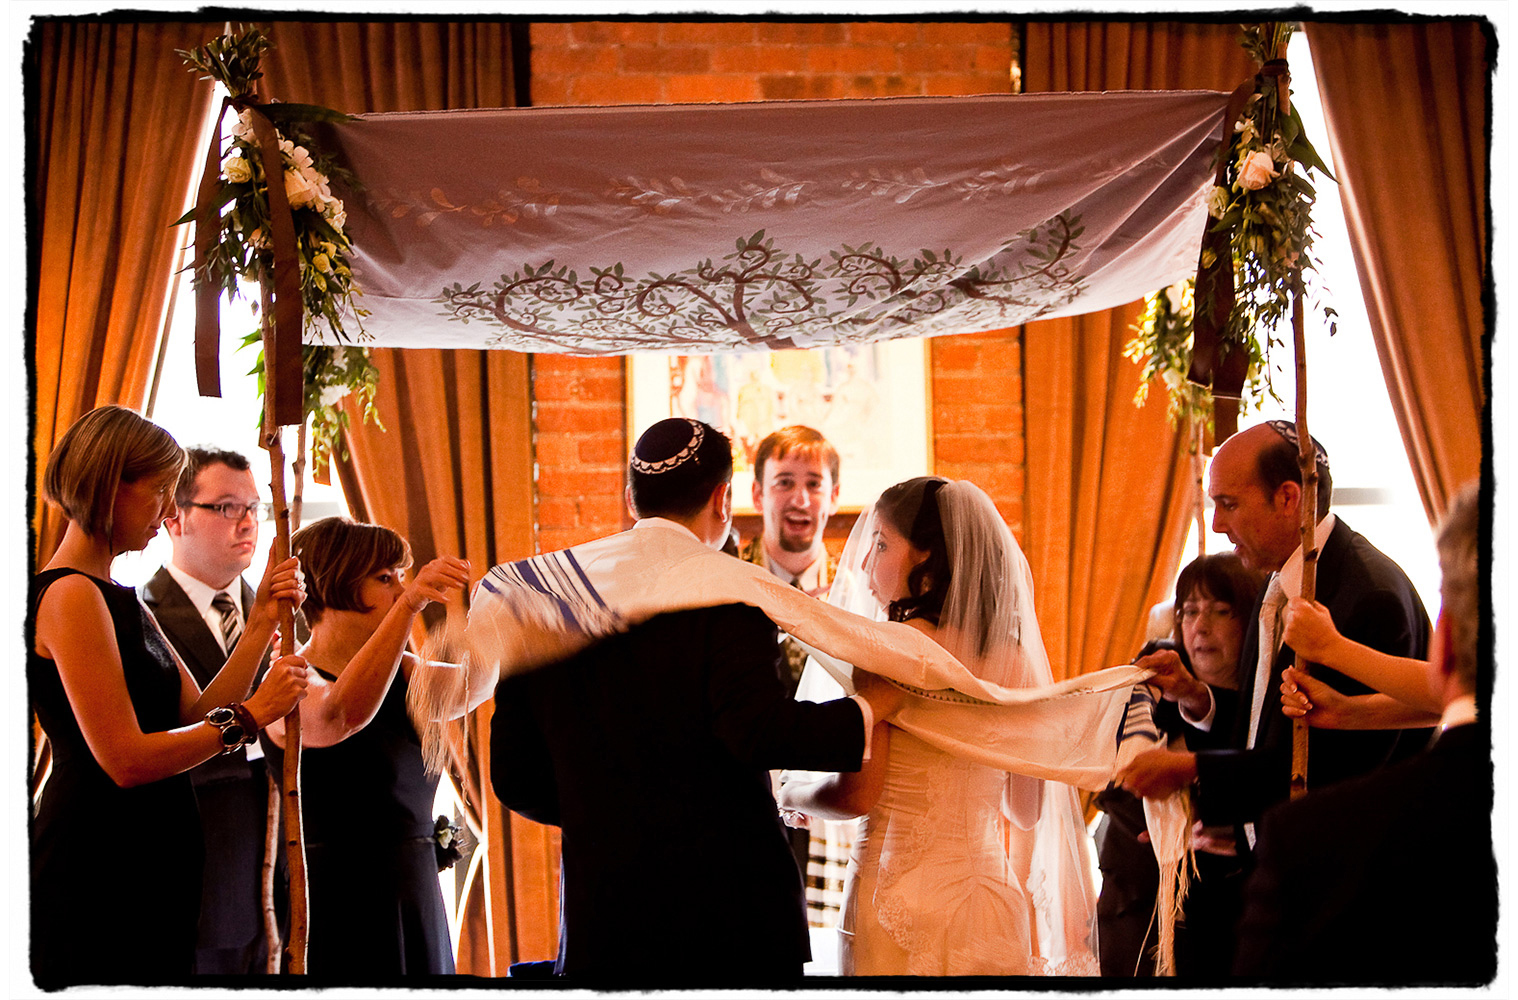 A handpainted cloth topped the Chuppah at this Tribeca Grill ceremony.